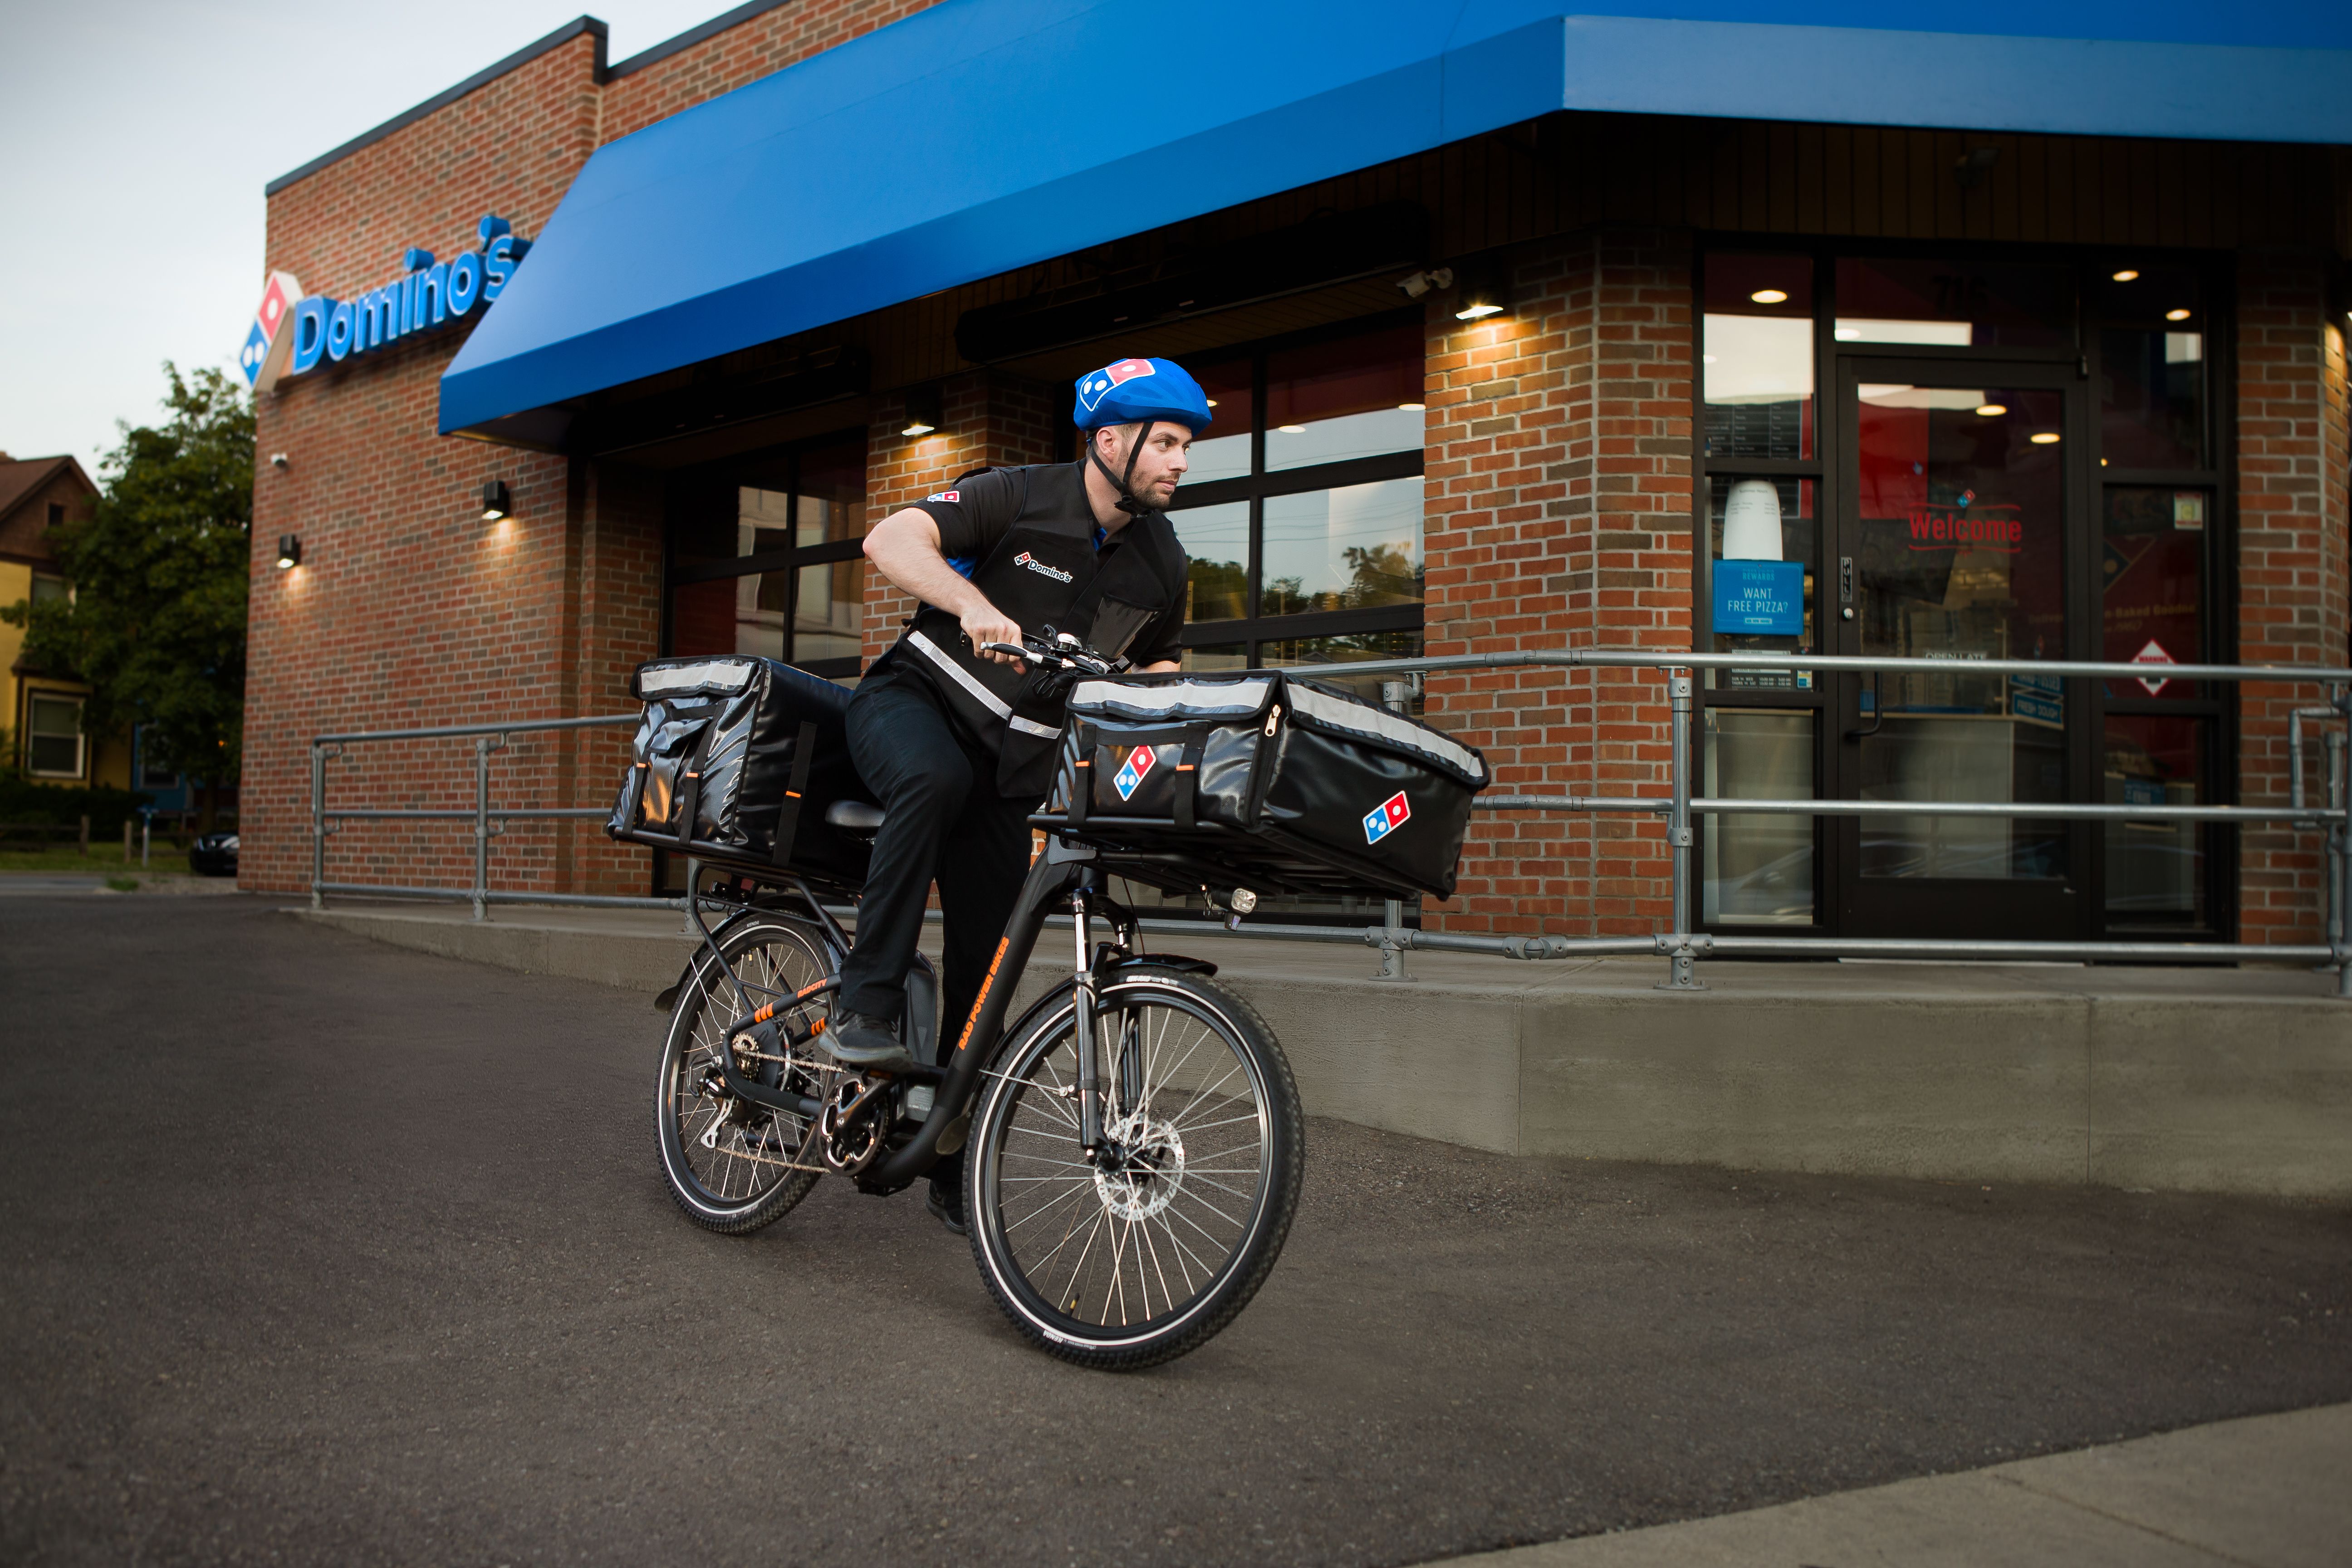 Domino's embraces delivery via e-bike, following in the footsteps of GrubHub and UberEats